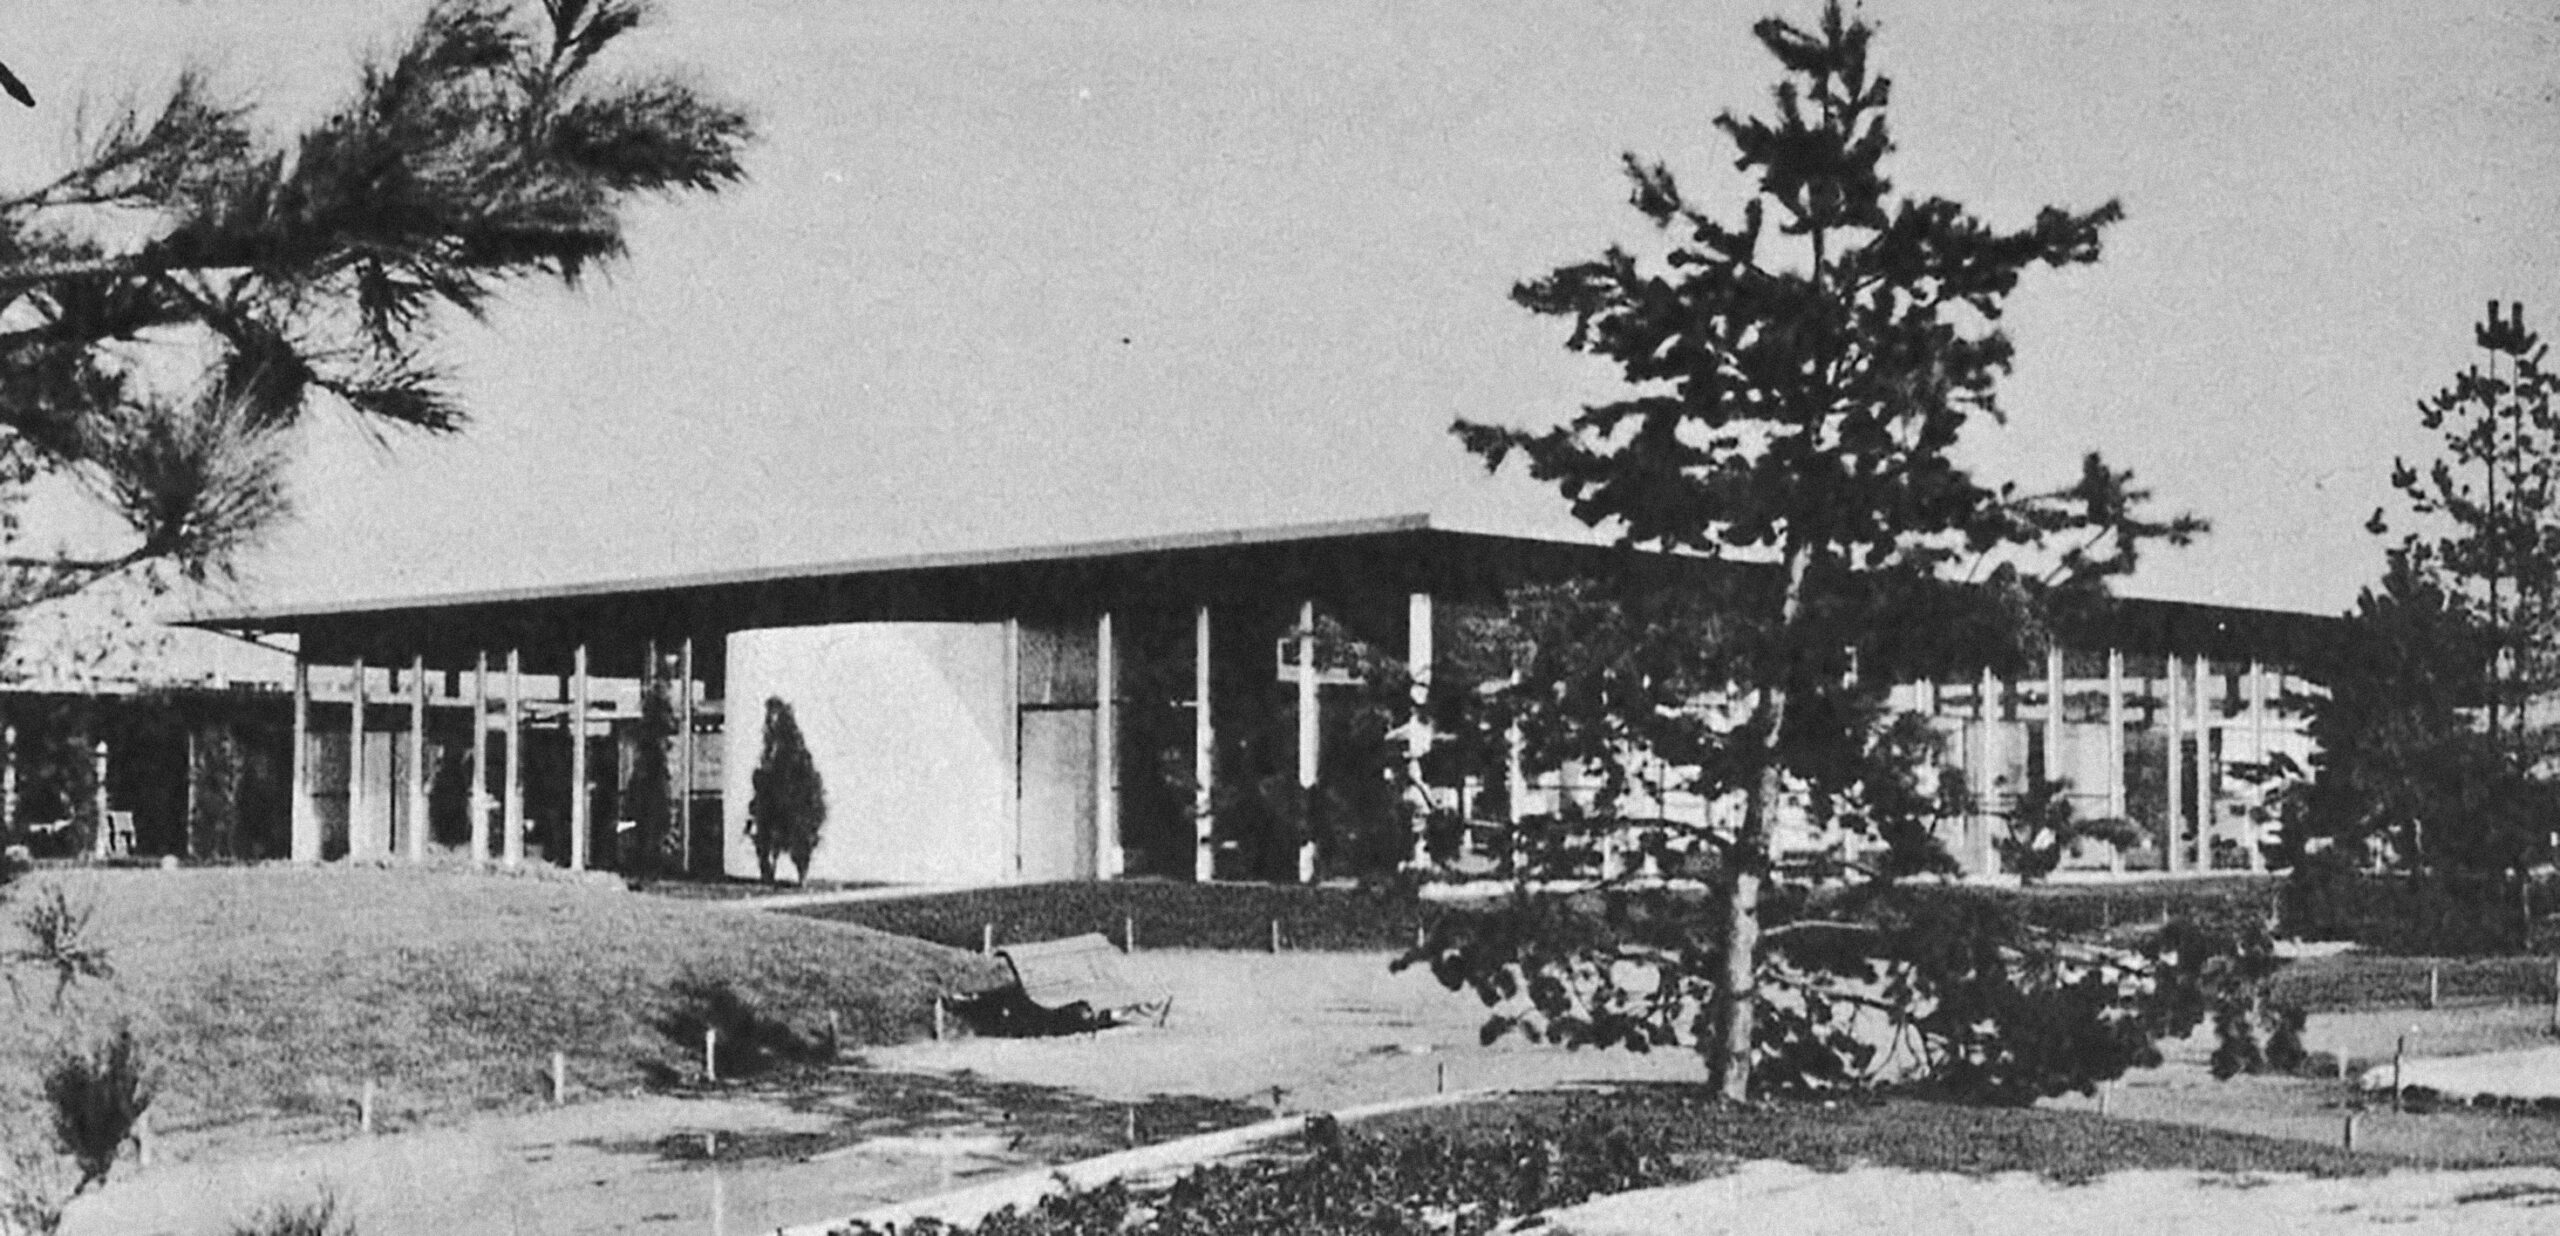 Two prefabricated houses at Exposition Villagexpo, Saint-Michel-sur-Orge, 1966.